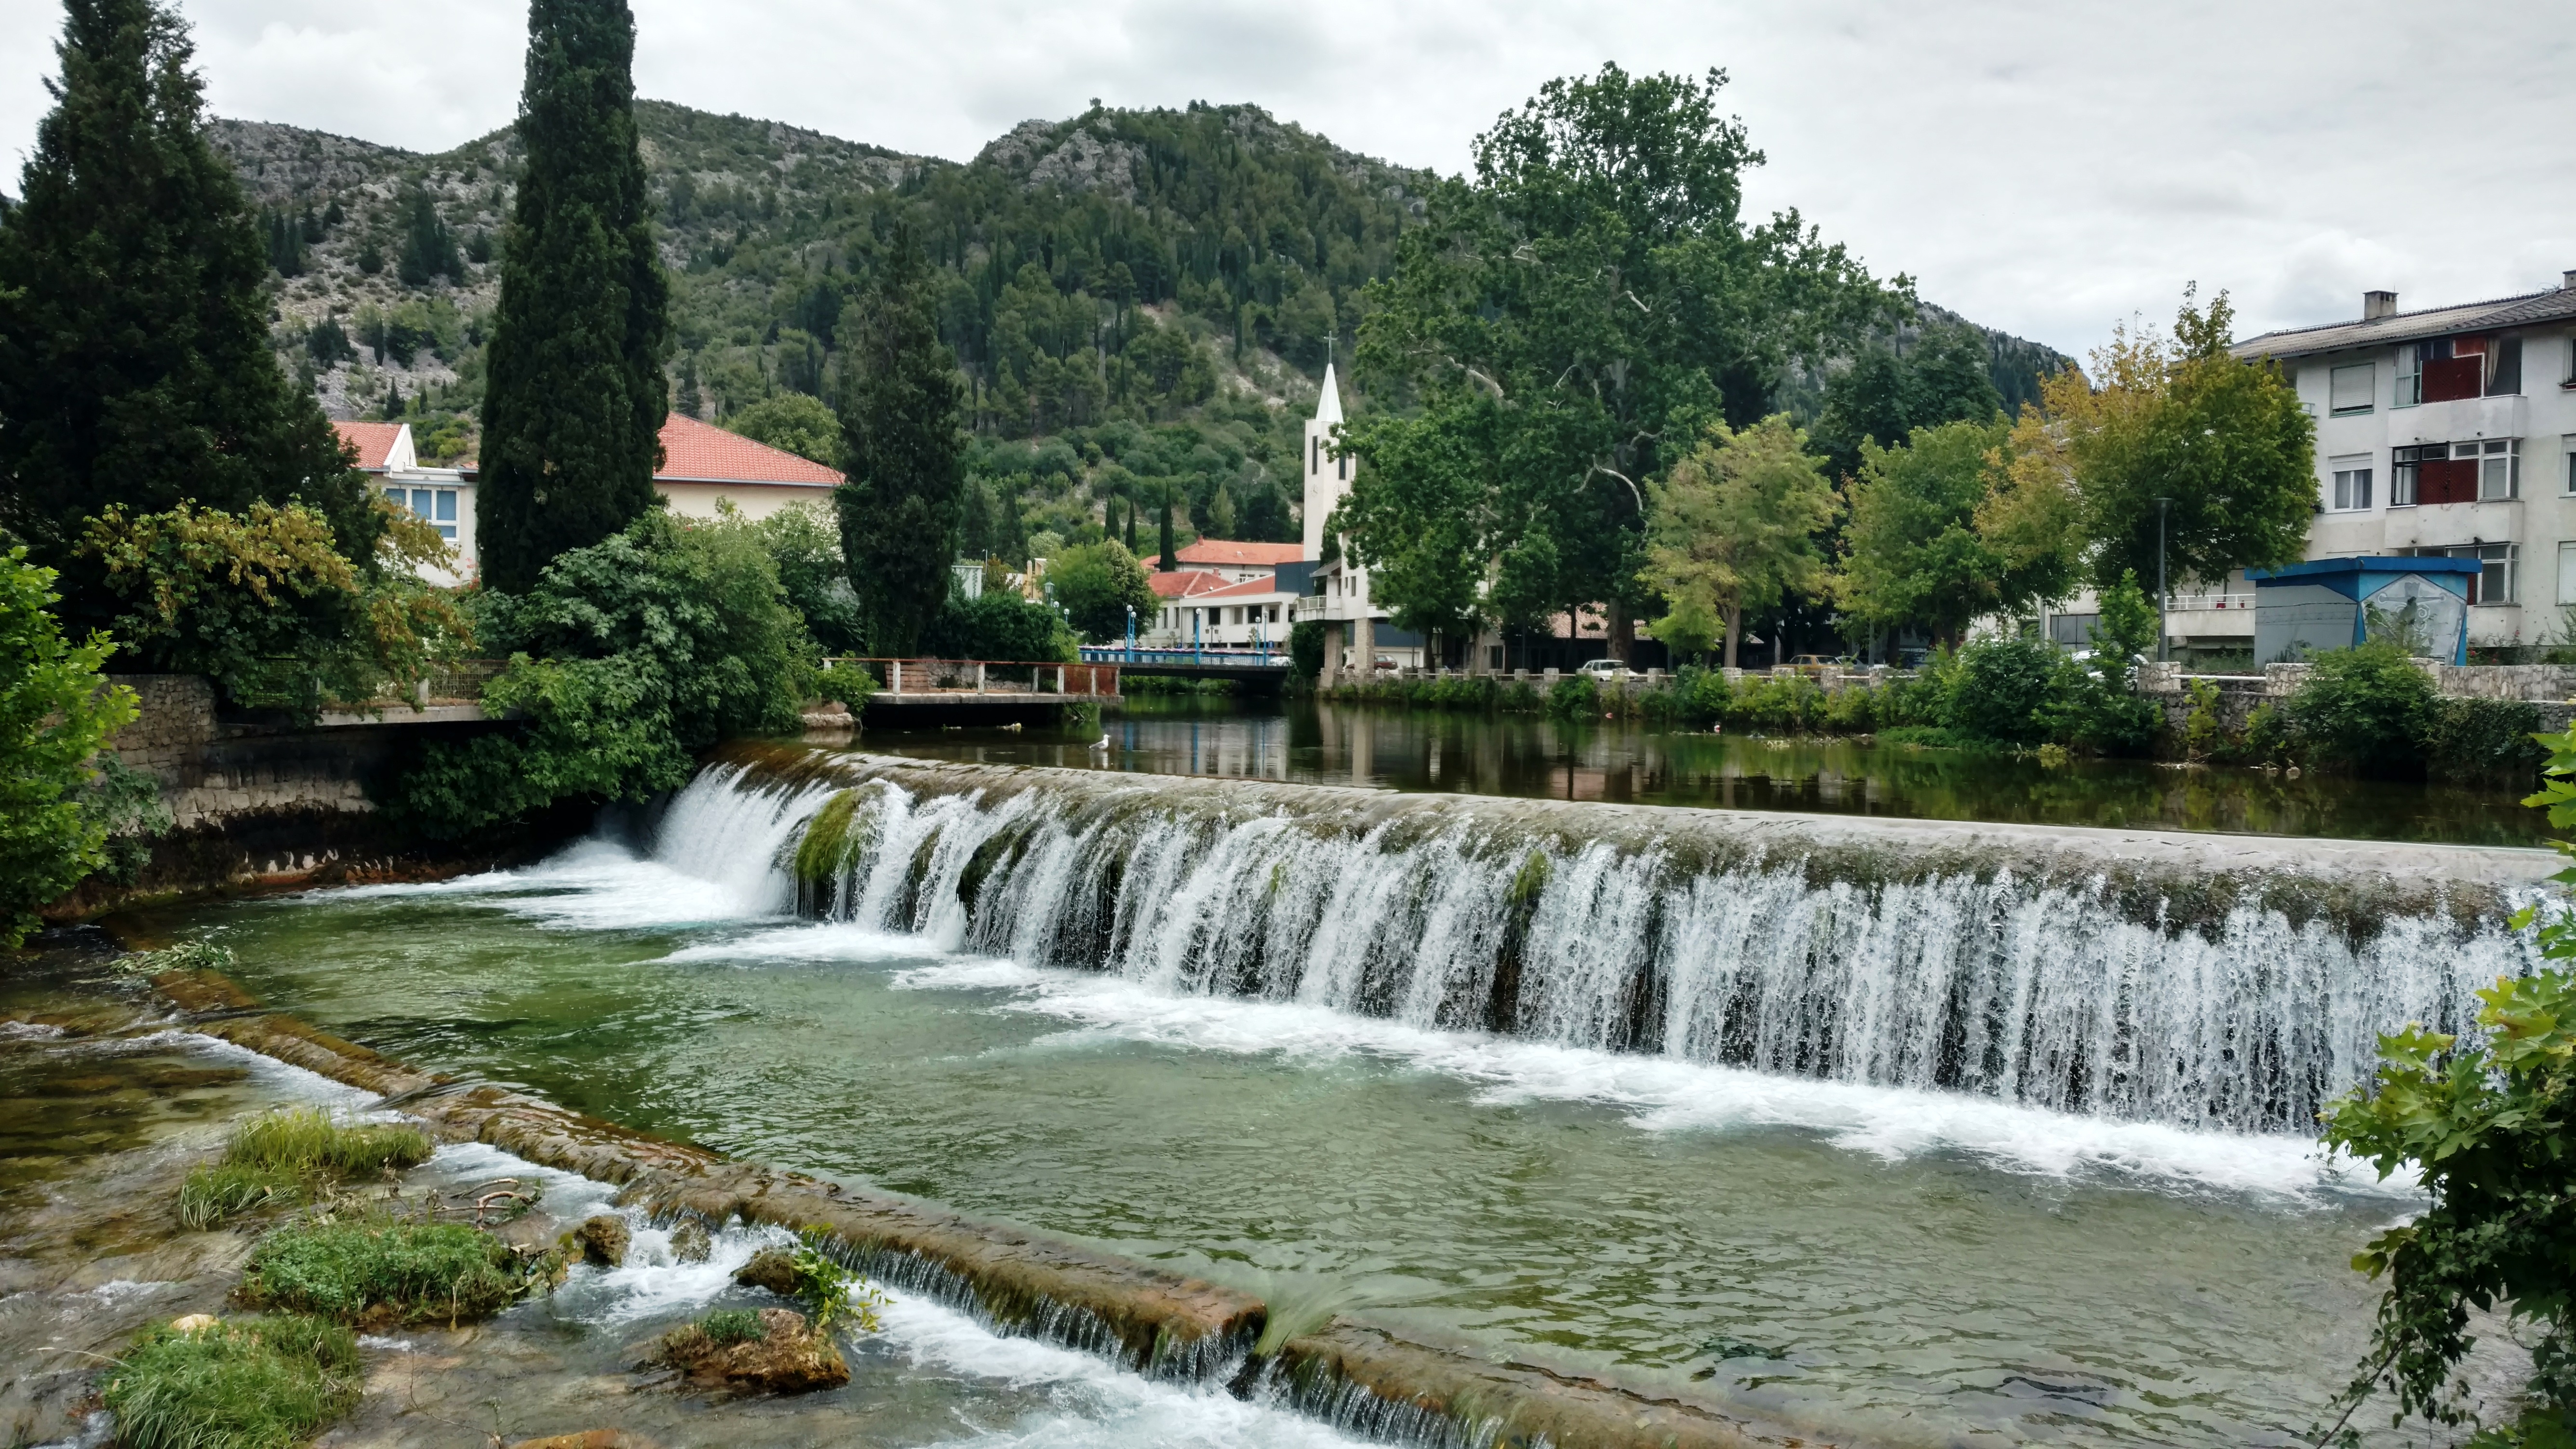 Stolac_20180628_121459827_HDR